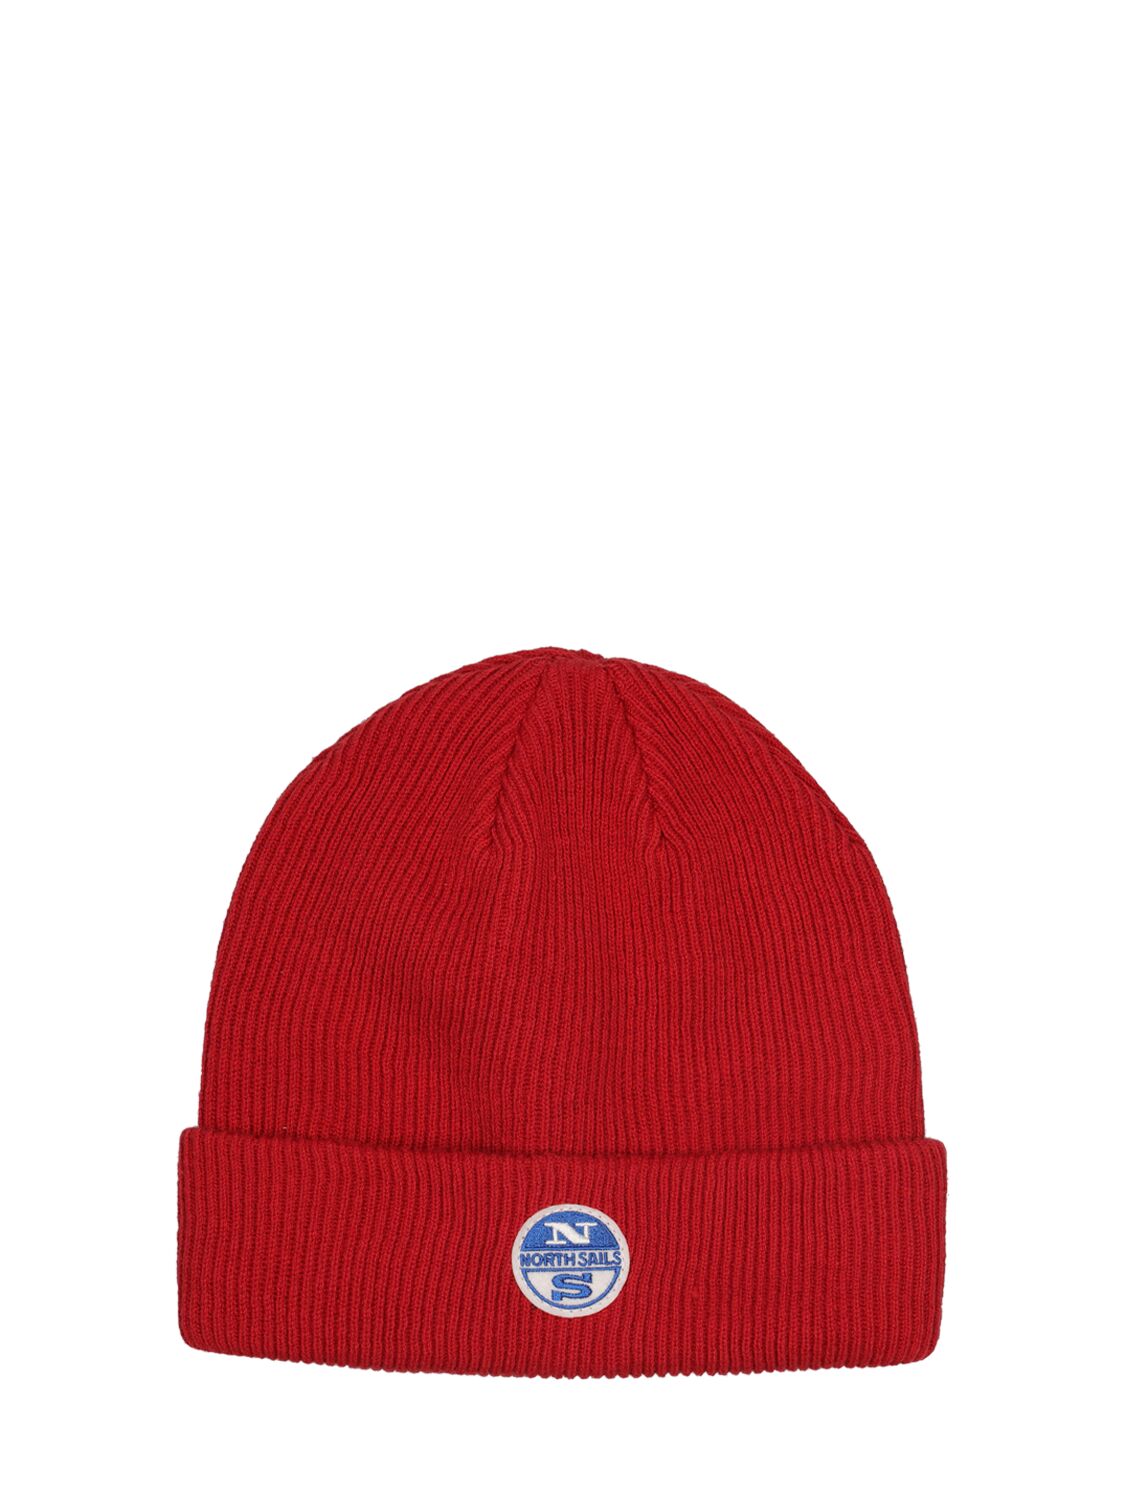 North Sails Babies' Cotton Blend Beanie In Red